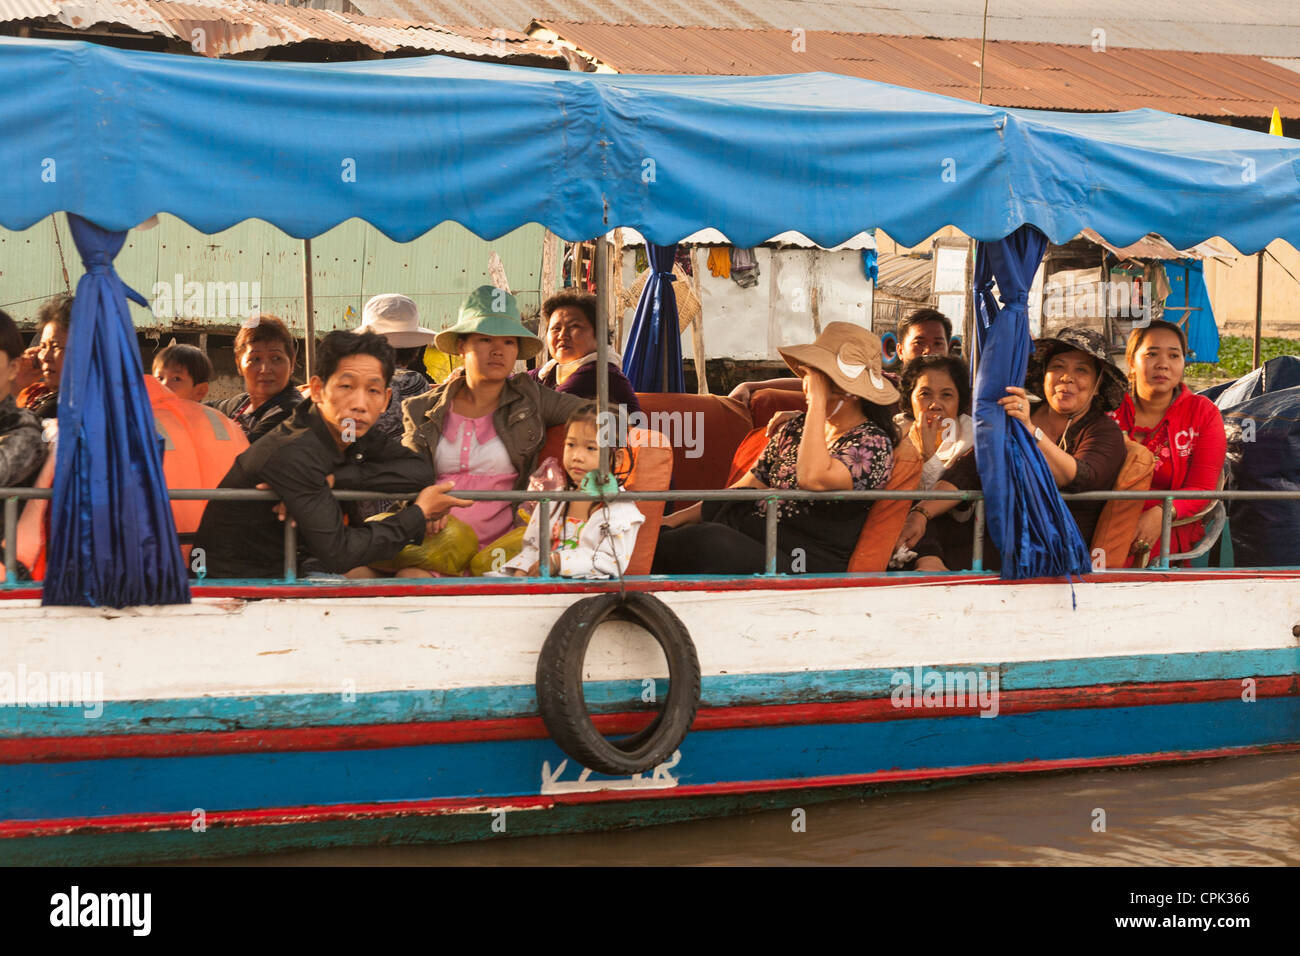 Local people on a boat in the floating market, Cai Rang near Can Tho, Mekong River Delta, Vietnam Stock Photo